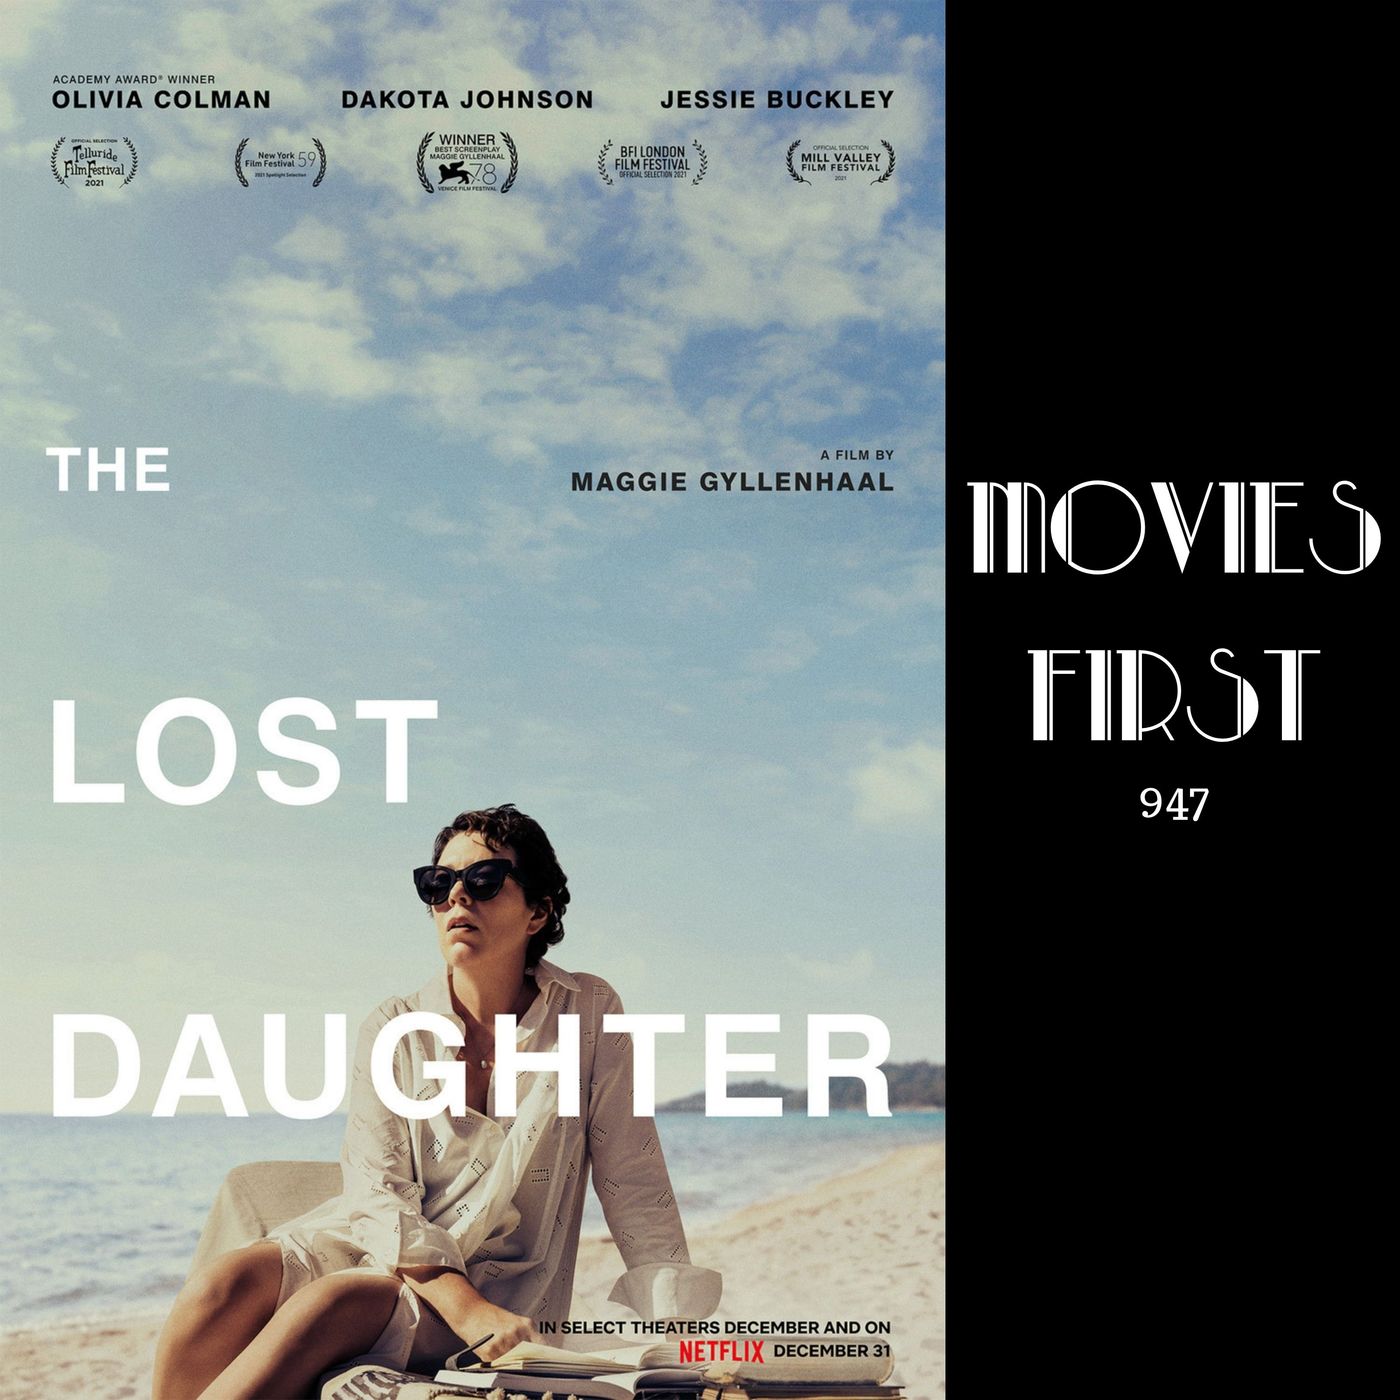 The Lost Daughter (Drama) (the @MoviesFirst review)